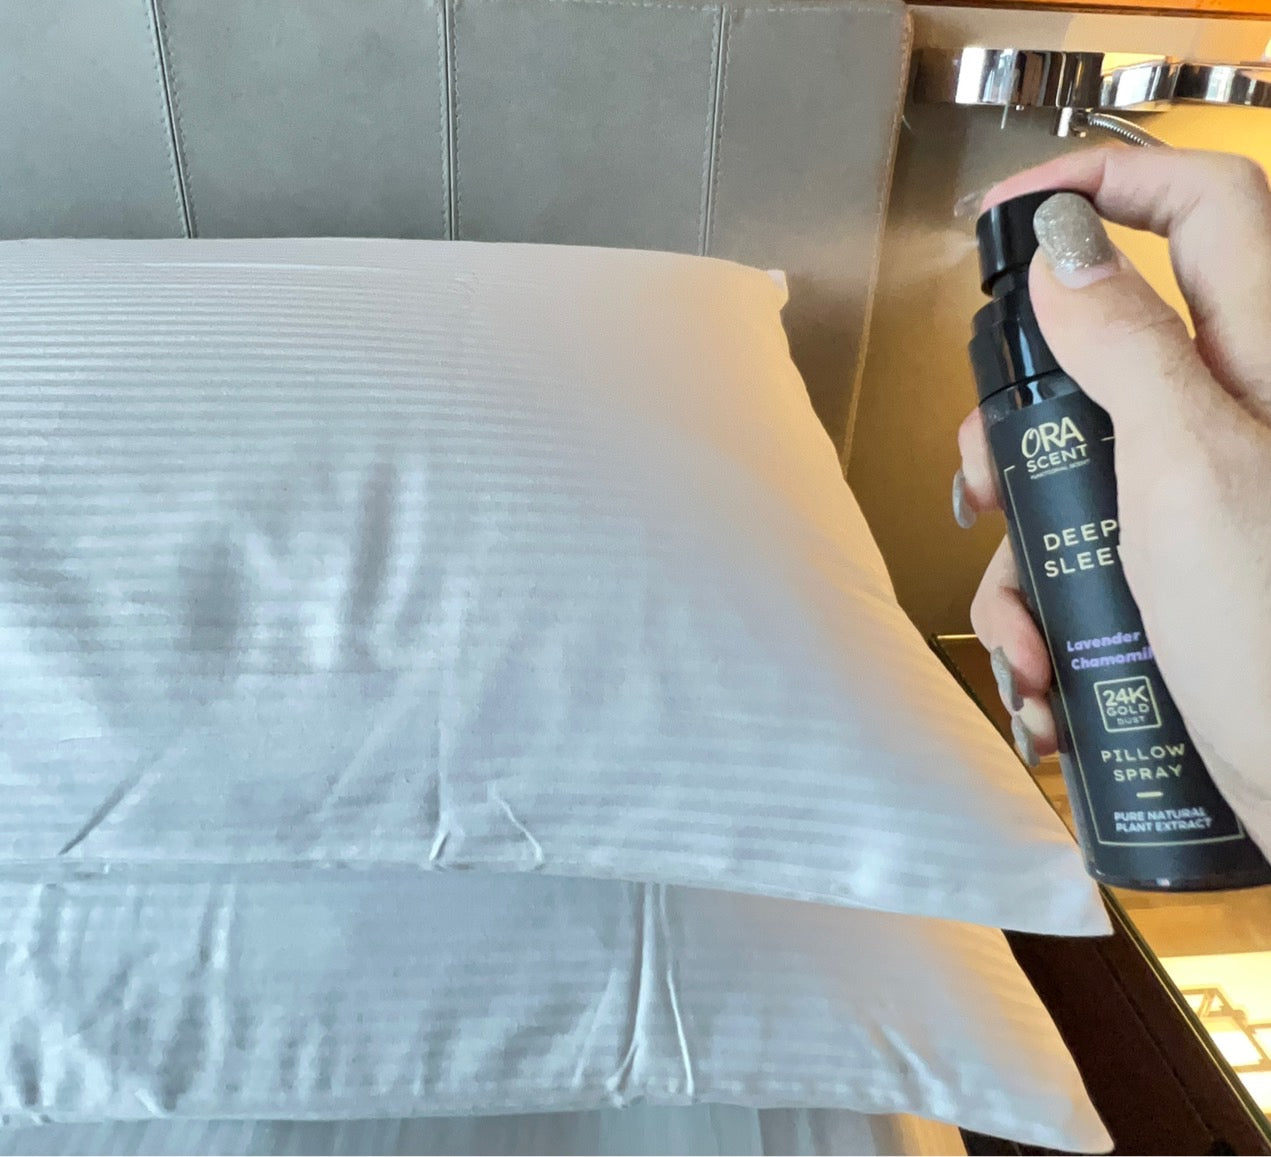 [NEW] Pillow and room spray mist with 24K pure gold and infused with functional scent "Olfactory System" technology jointly produce in Switzerland. A new type of Aromatherapy with scent that does more than smelling good. Ora Scent. Ora Bedding Singapore. Home fragrance. Essential oil.